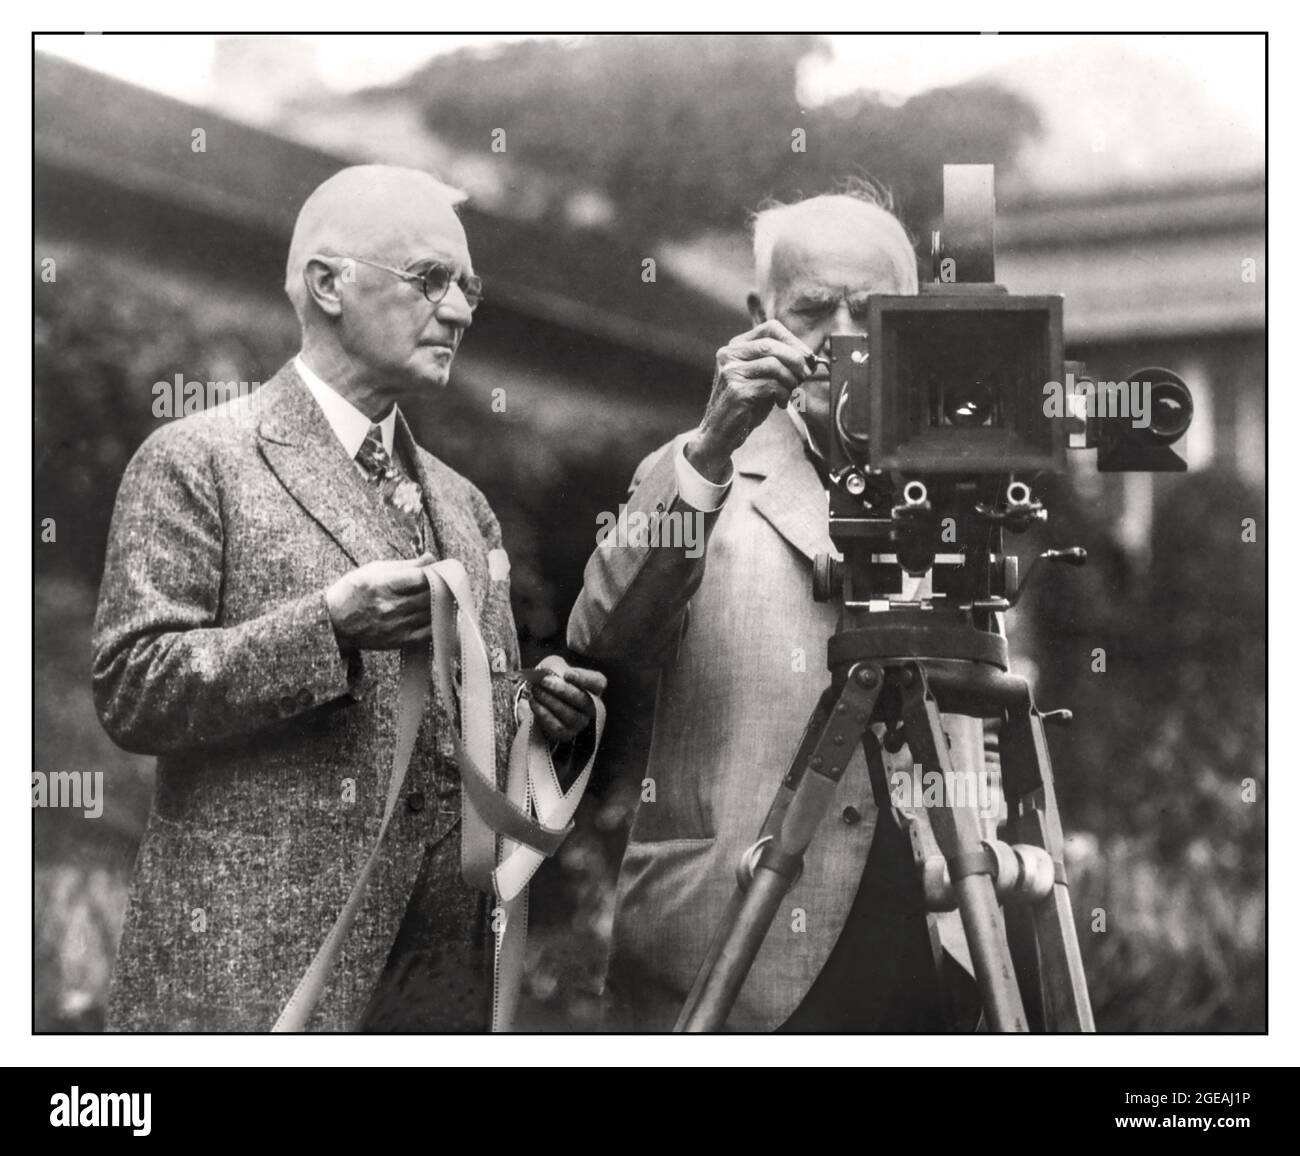 George Eastman founder and visionary of The Easman Kodak Company with Thomas Edison fellow visonary and inventor George Eastman and Thomas Edison  In July 1928, George Eastman and Thomas Edison introduced their color motion picture film to the world.  Inventor Thomas Edison and George Eastman pose for a portrait with a motion picture camera and film at Eastman's house in 1928 in Rochester, New York. USA Stock Photo